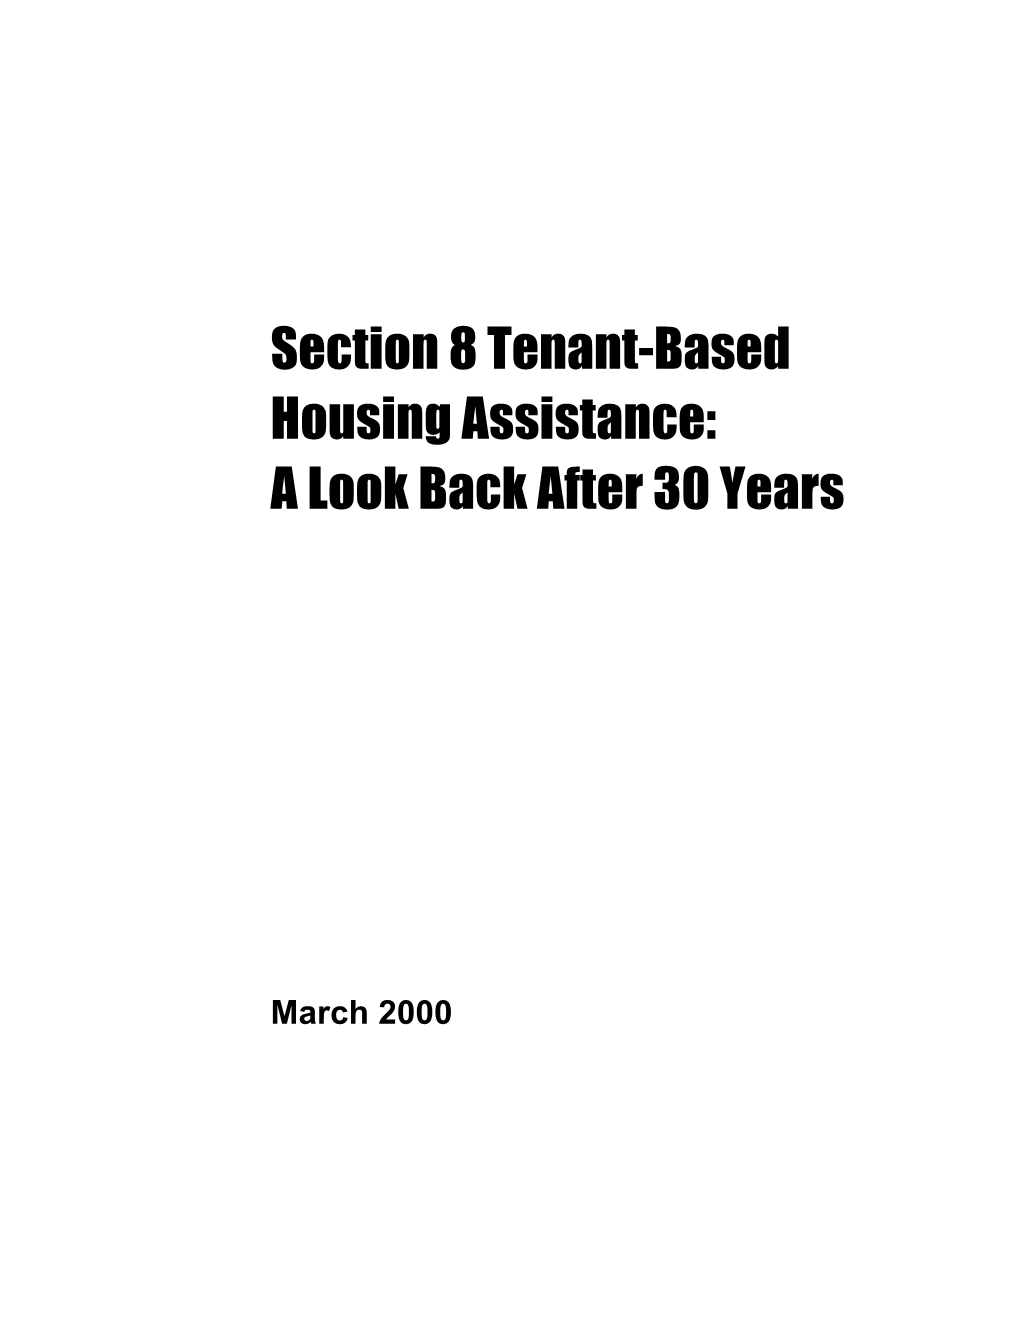 Section 8 Tenant-Based Housing Assistance: a Look Back After 30 Years